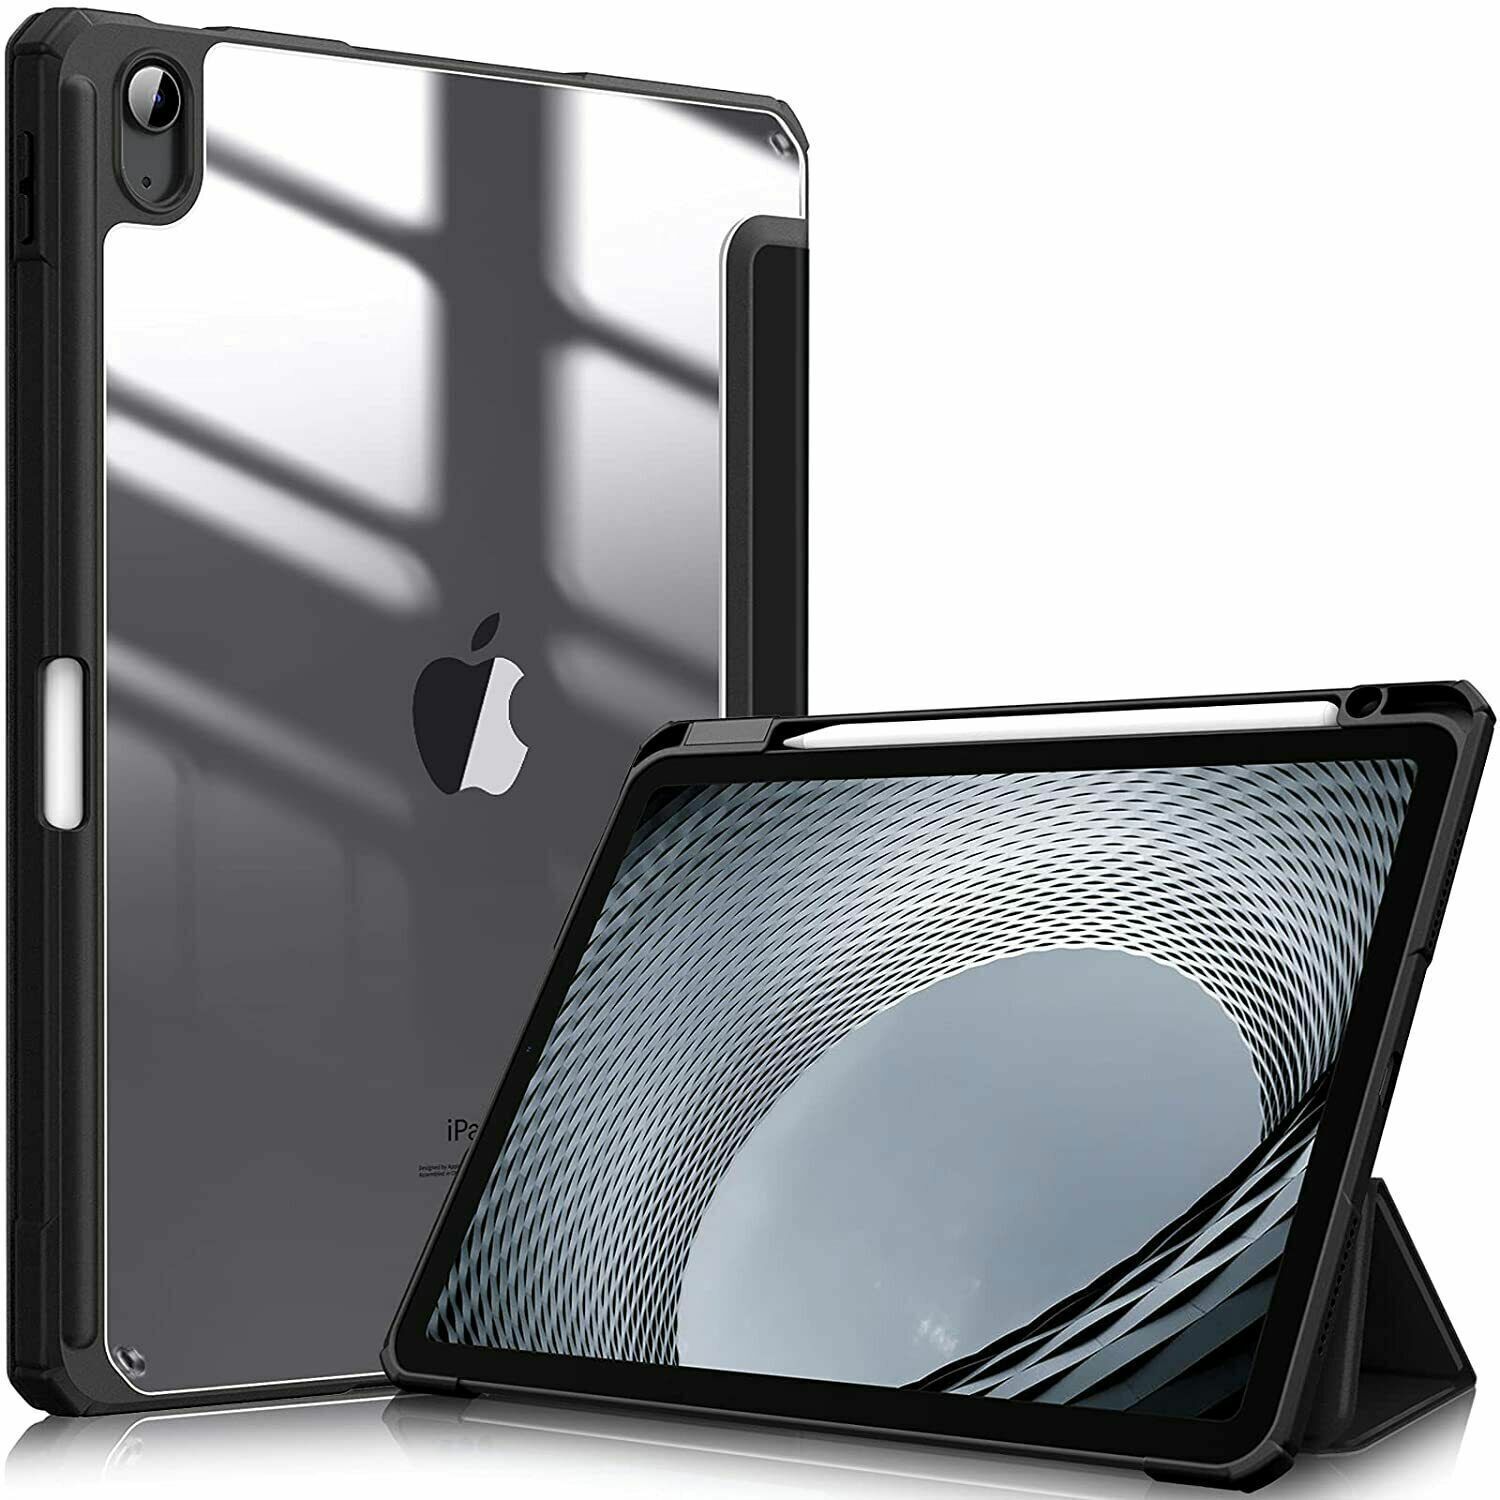 Hybrid Slim Case for iPad Air 5th Gen (2022) Shockproof Cover Clear Back Shell